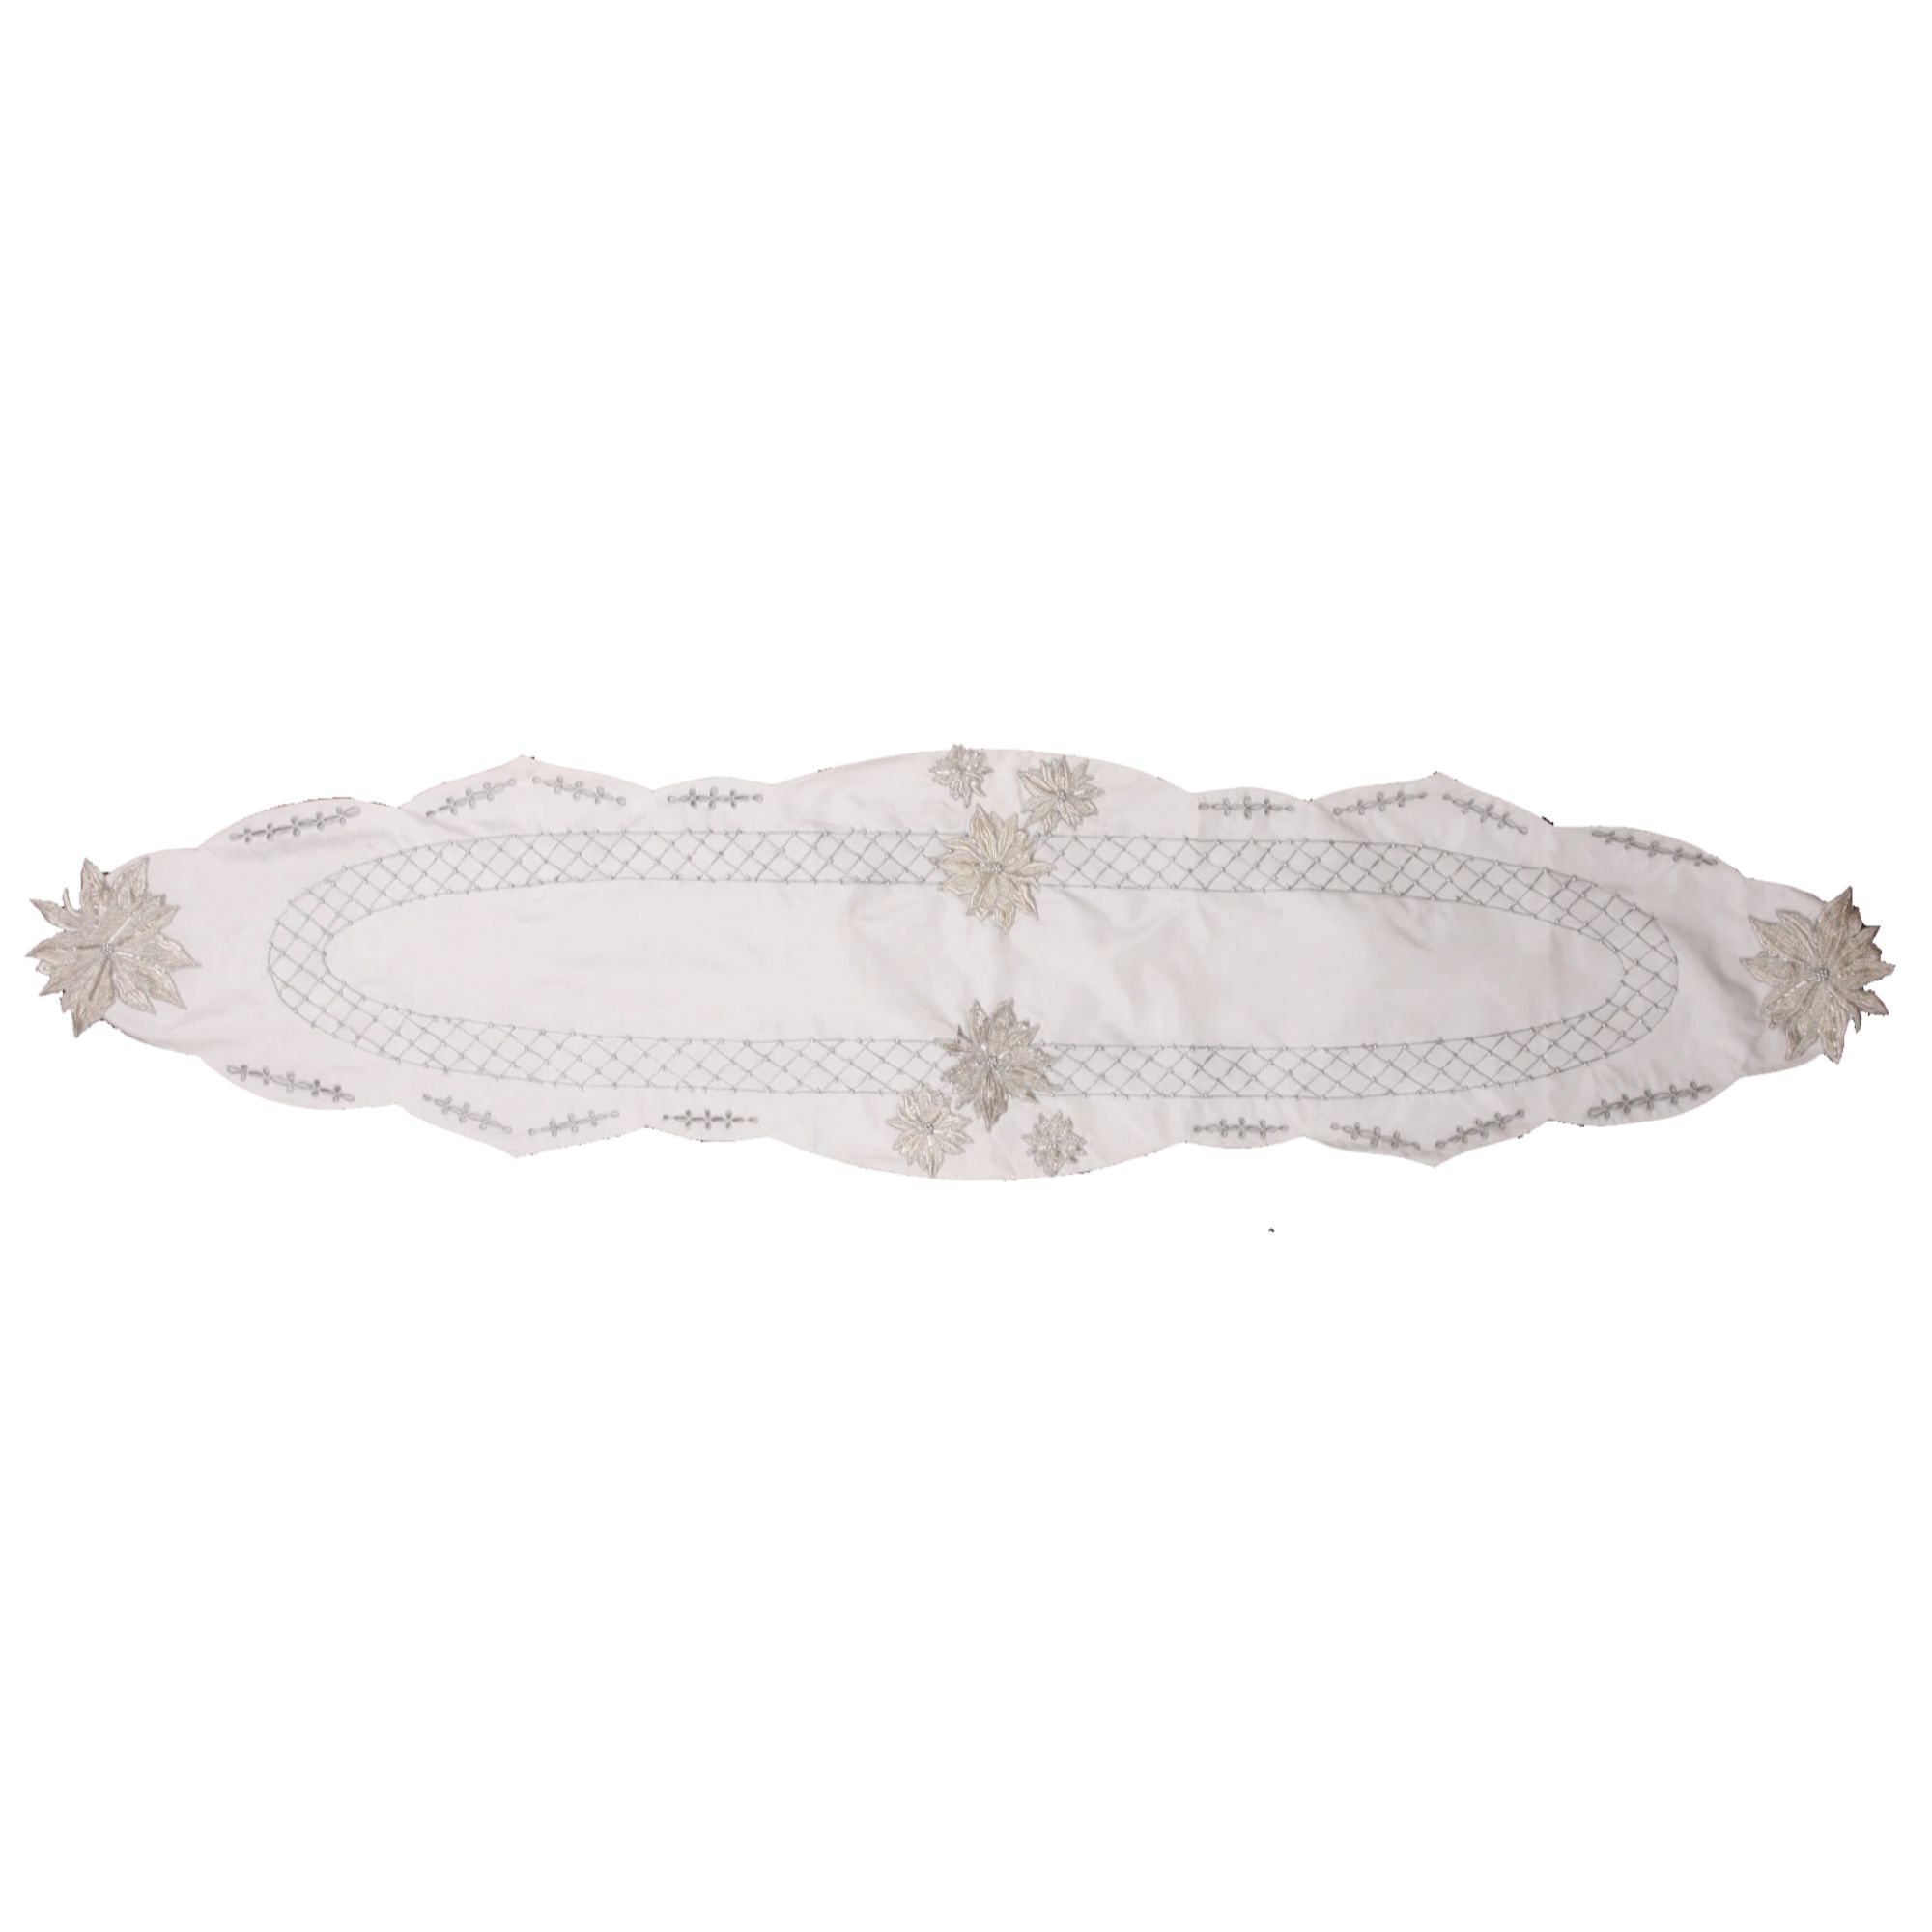 Crafted Creations 16" x 68" White Floral Hand Beaded Table Runner with Scallop Edge